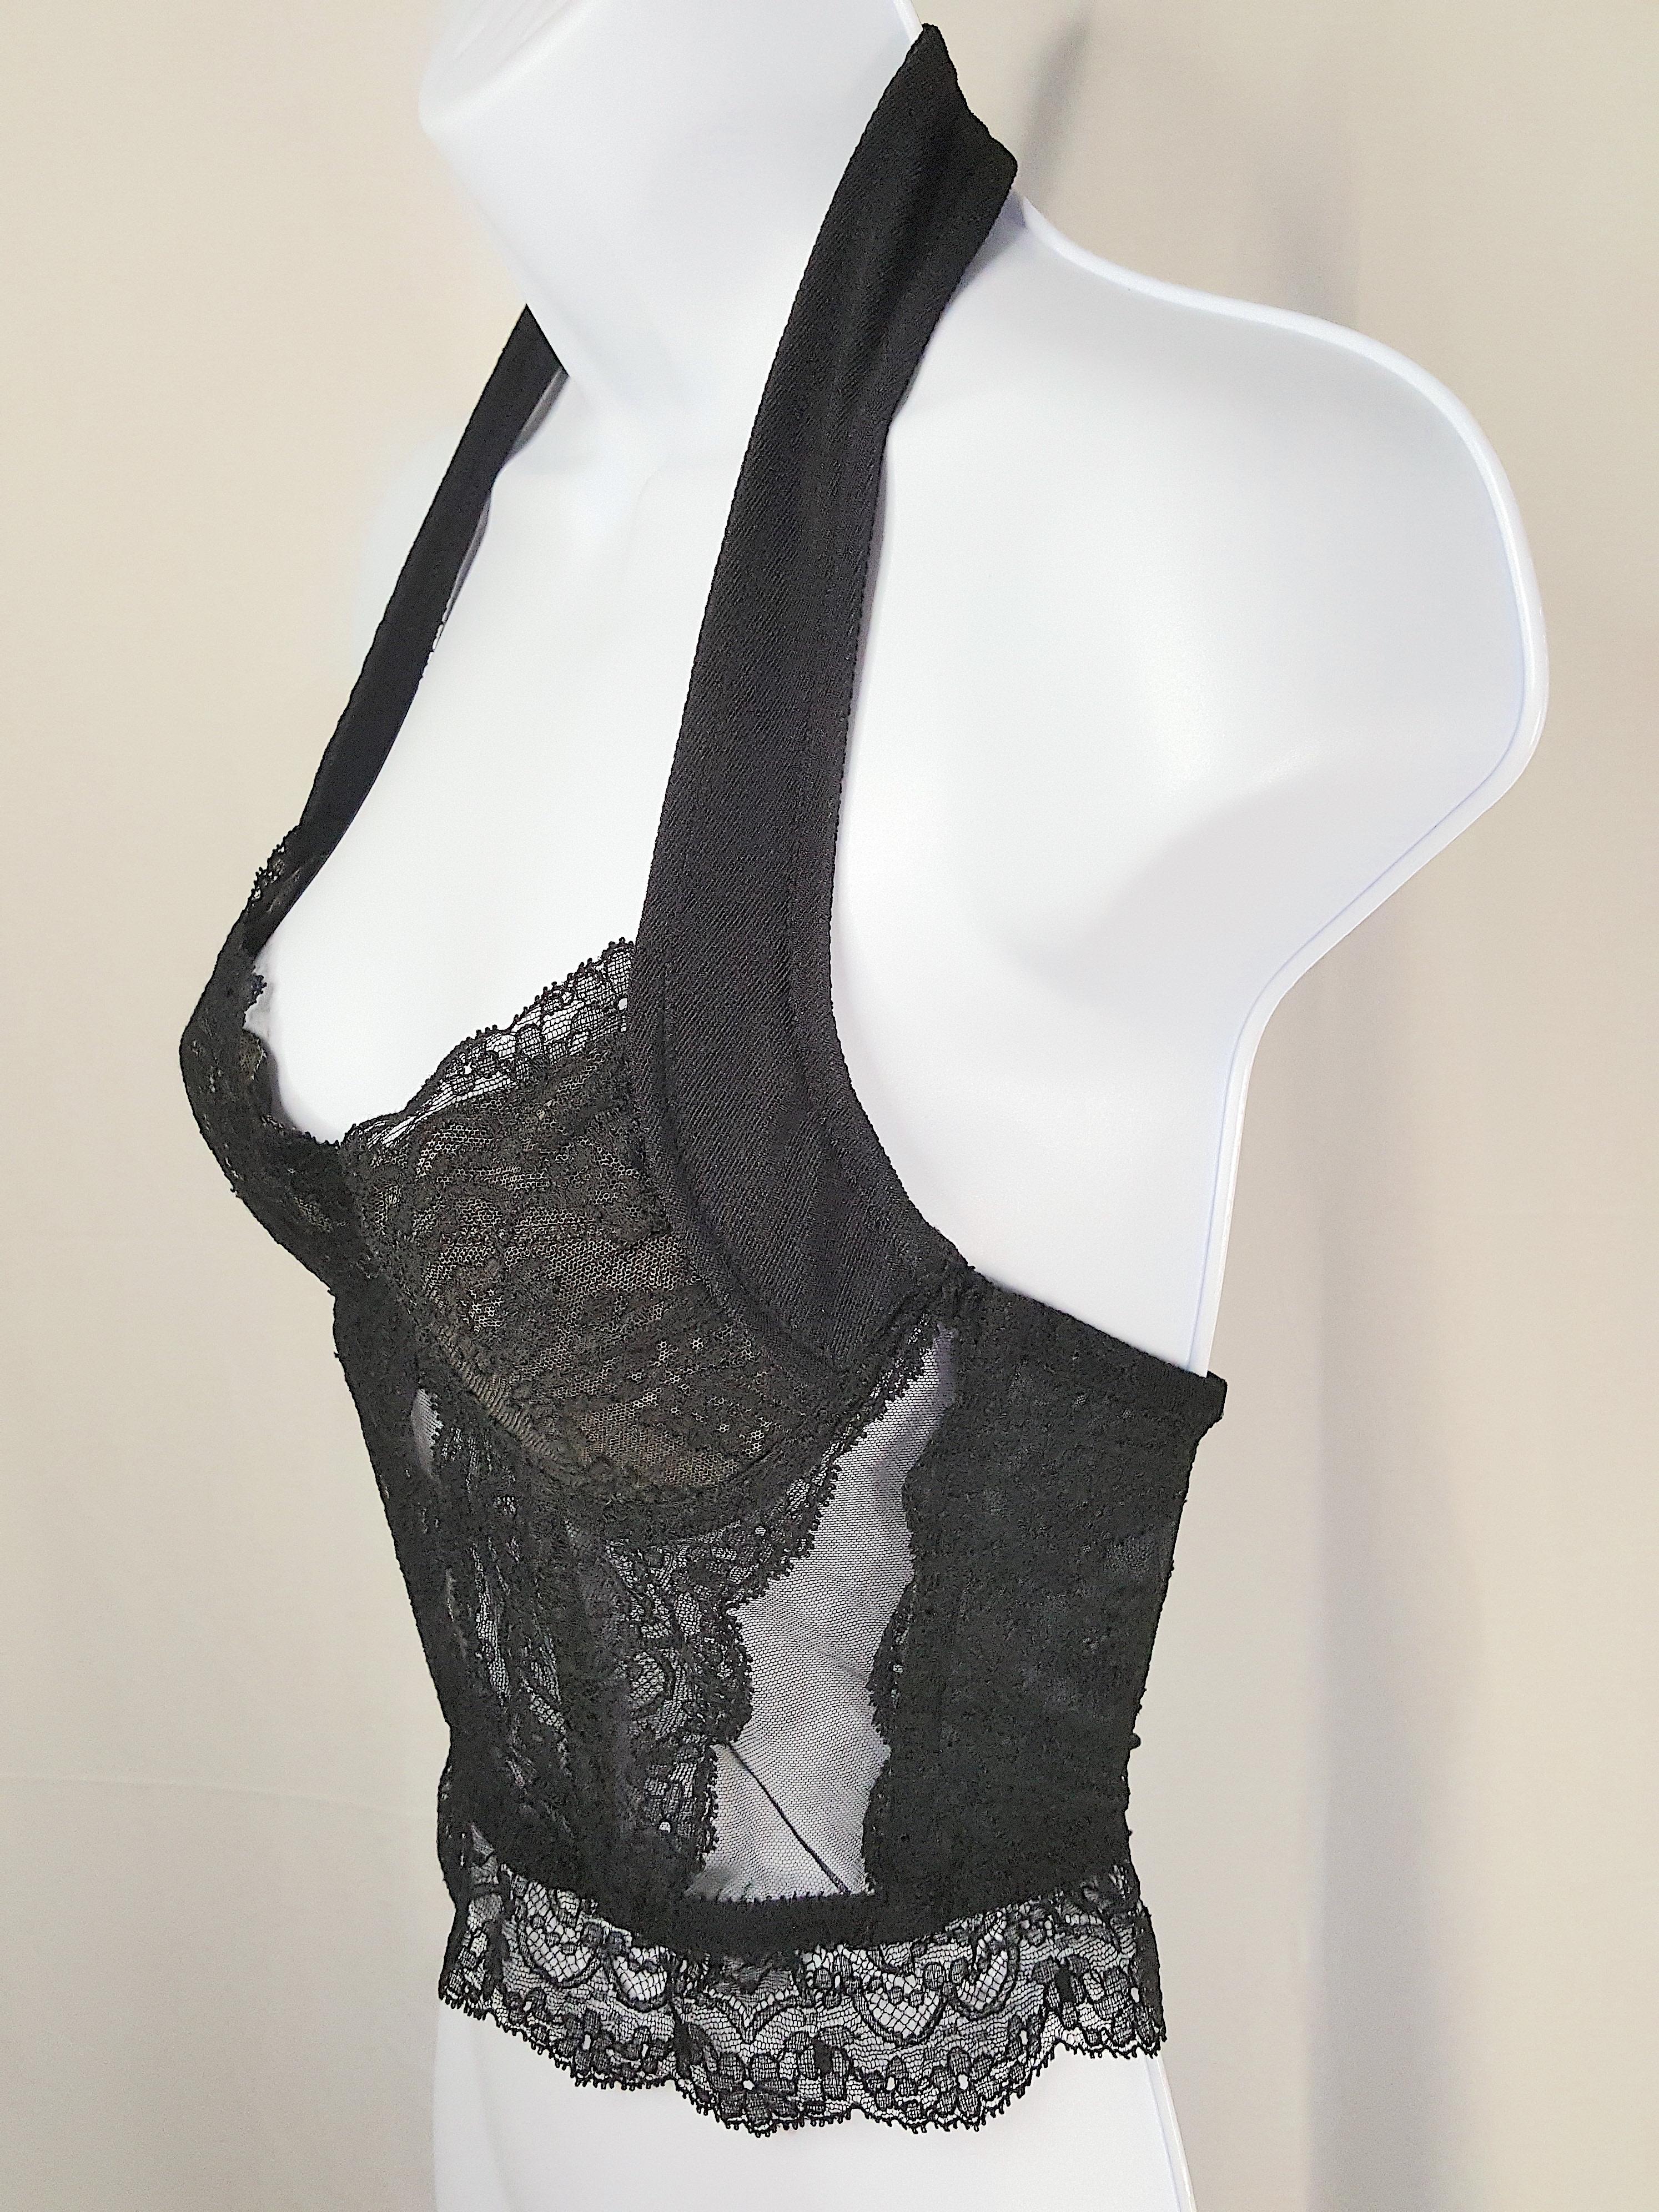 ChristainDior Galliano 2001 MadeInFrance LaceNetCorset Black HalterBustier Boxed For Sale 5